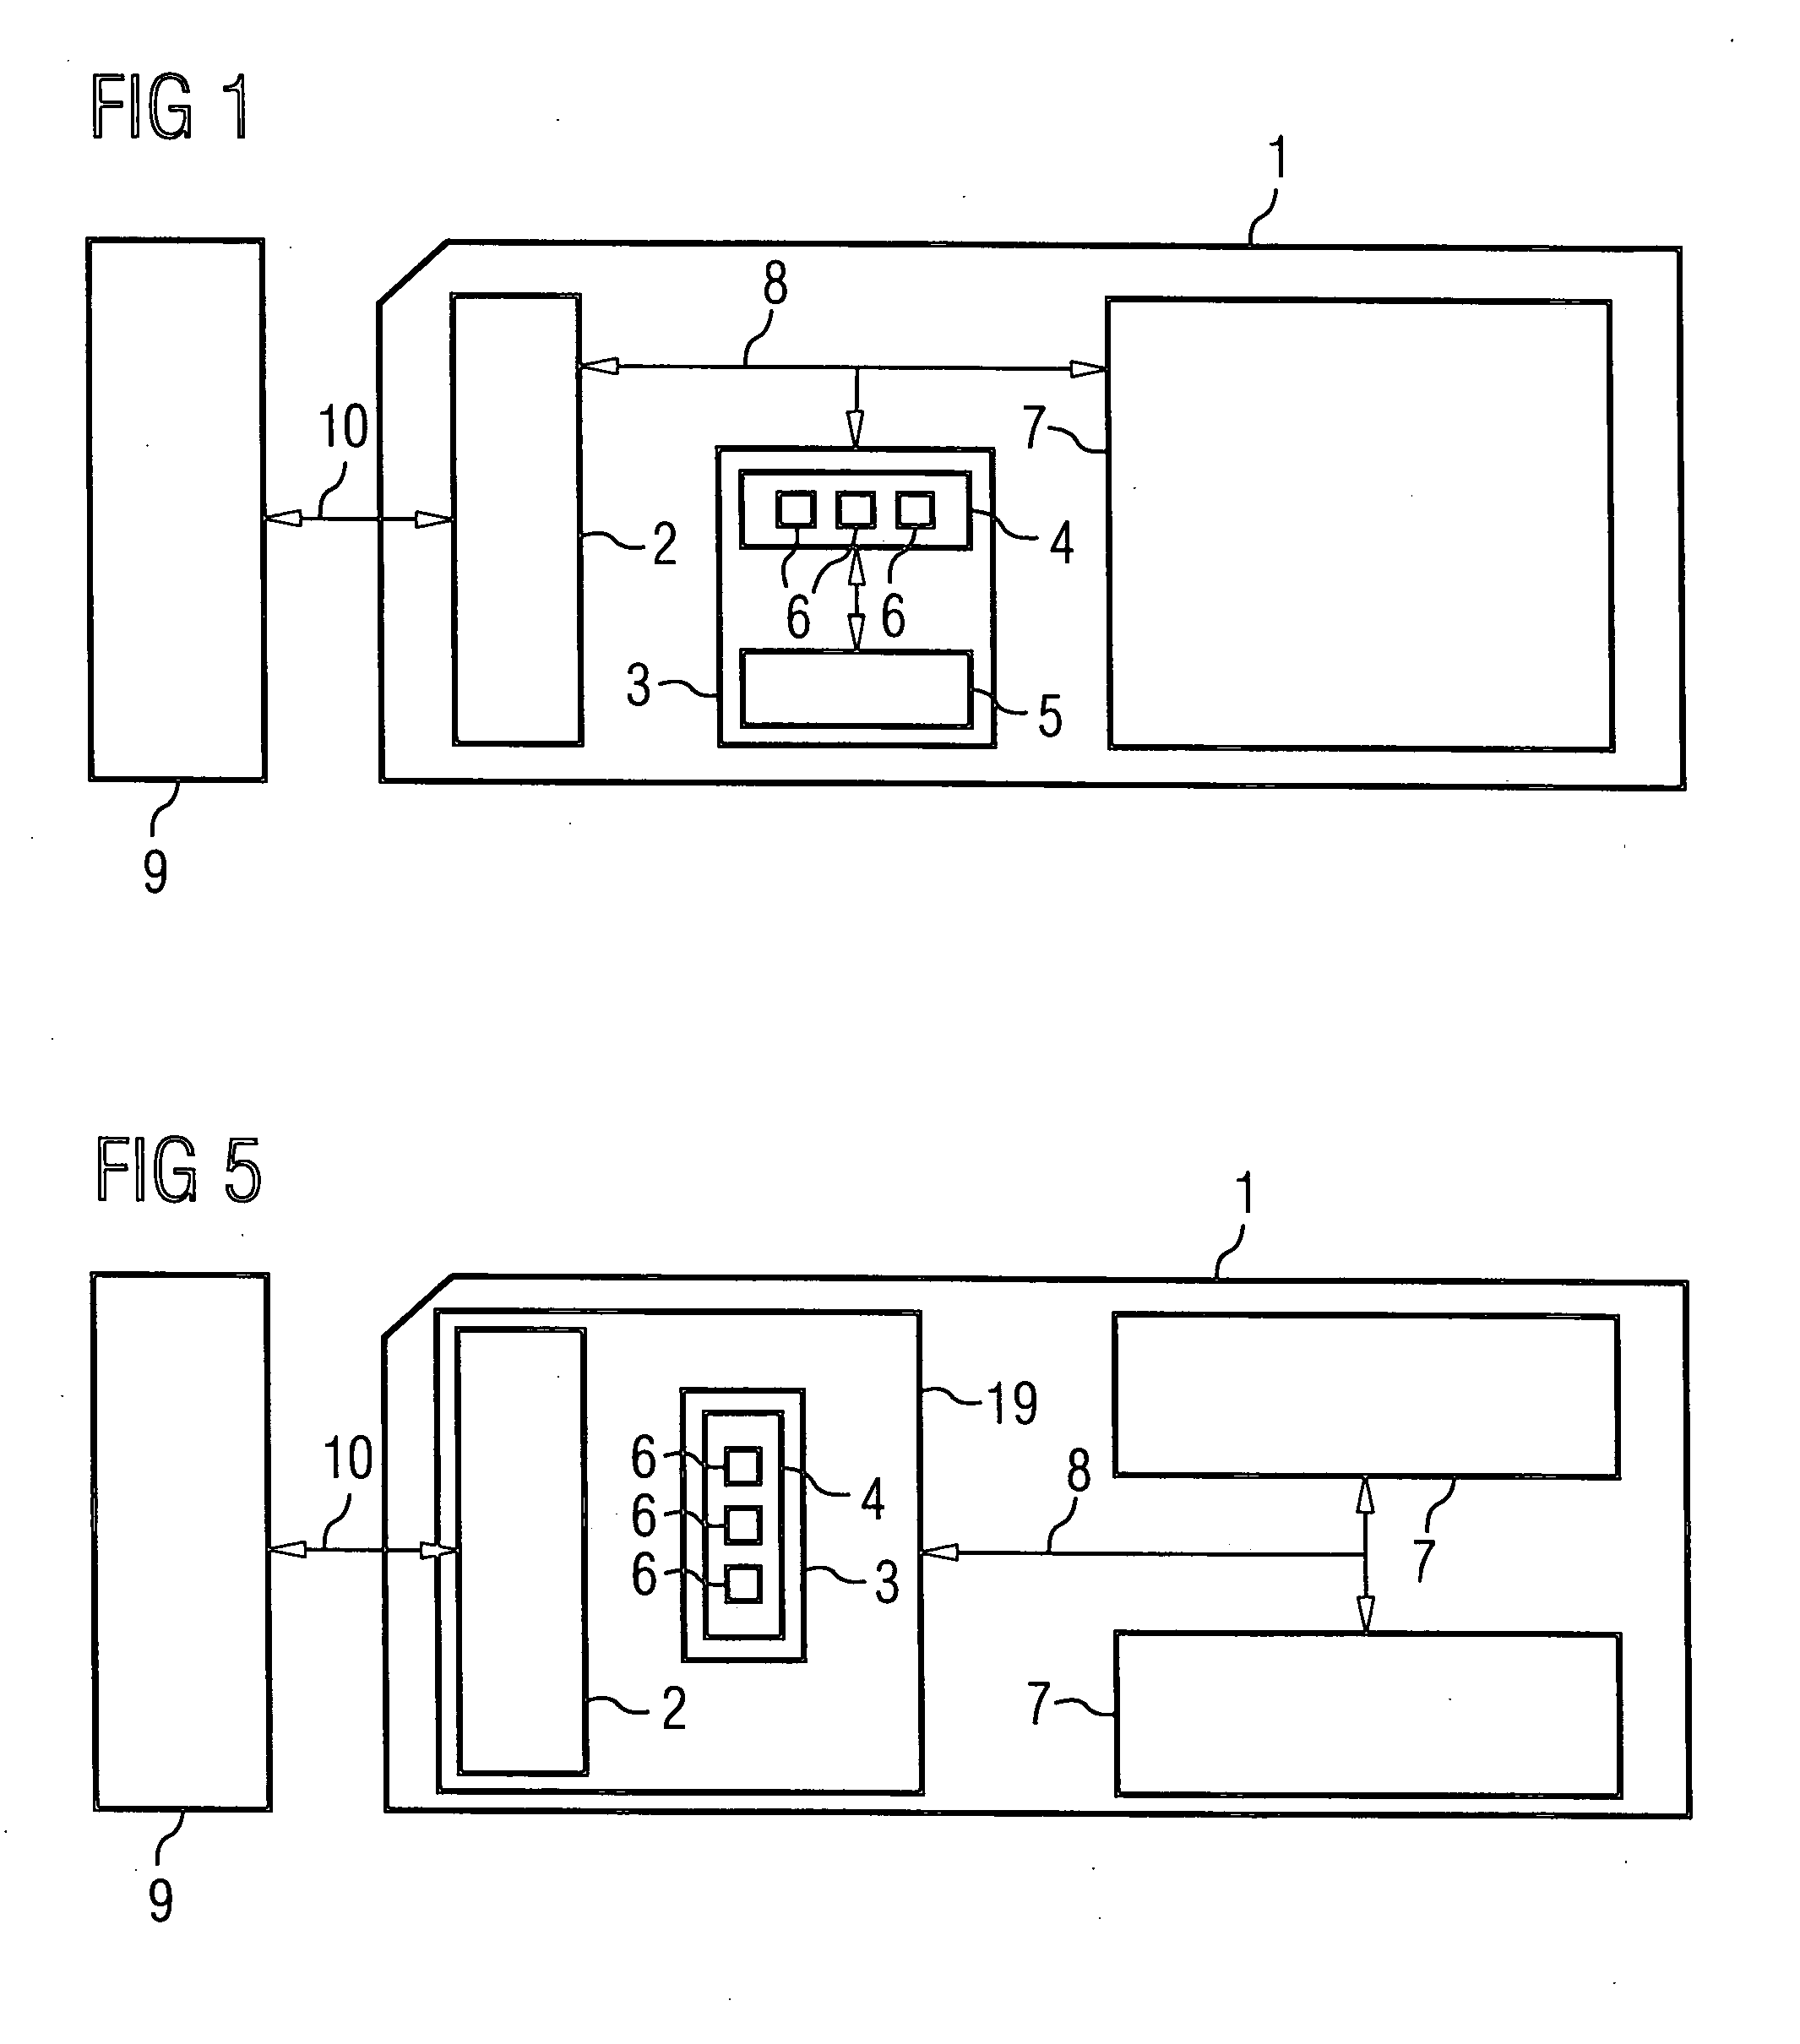 Method and system for allocating, accessing and de-allocating storage space of a memory card